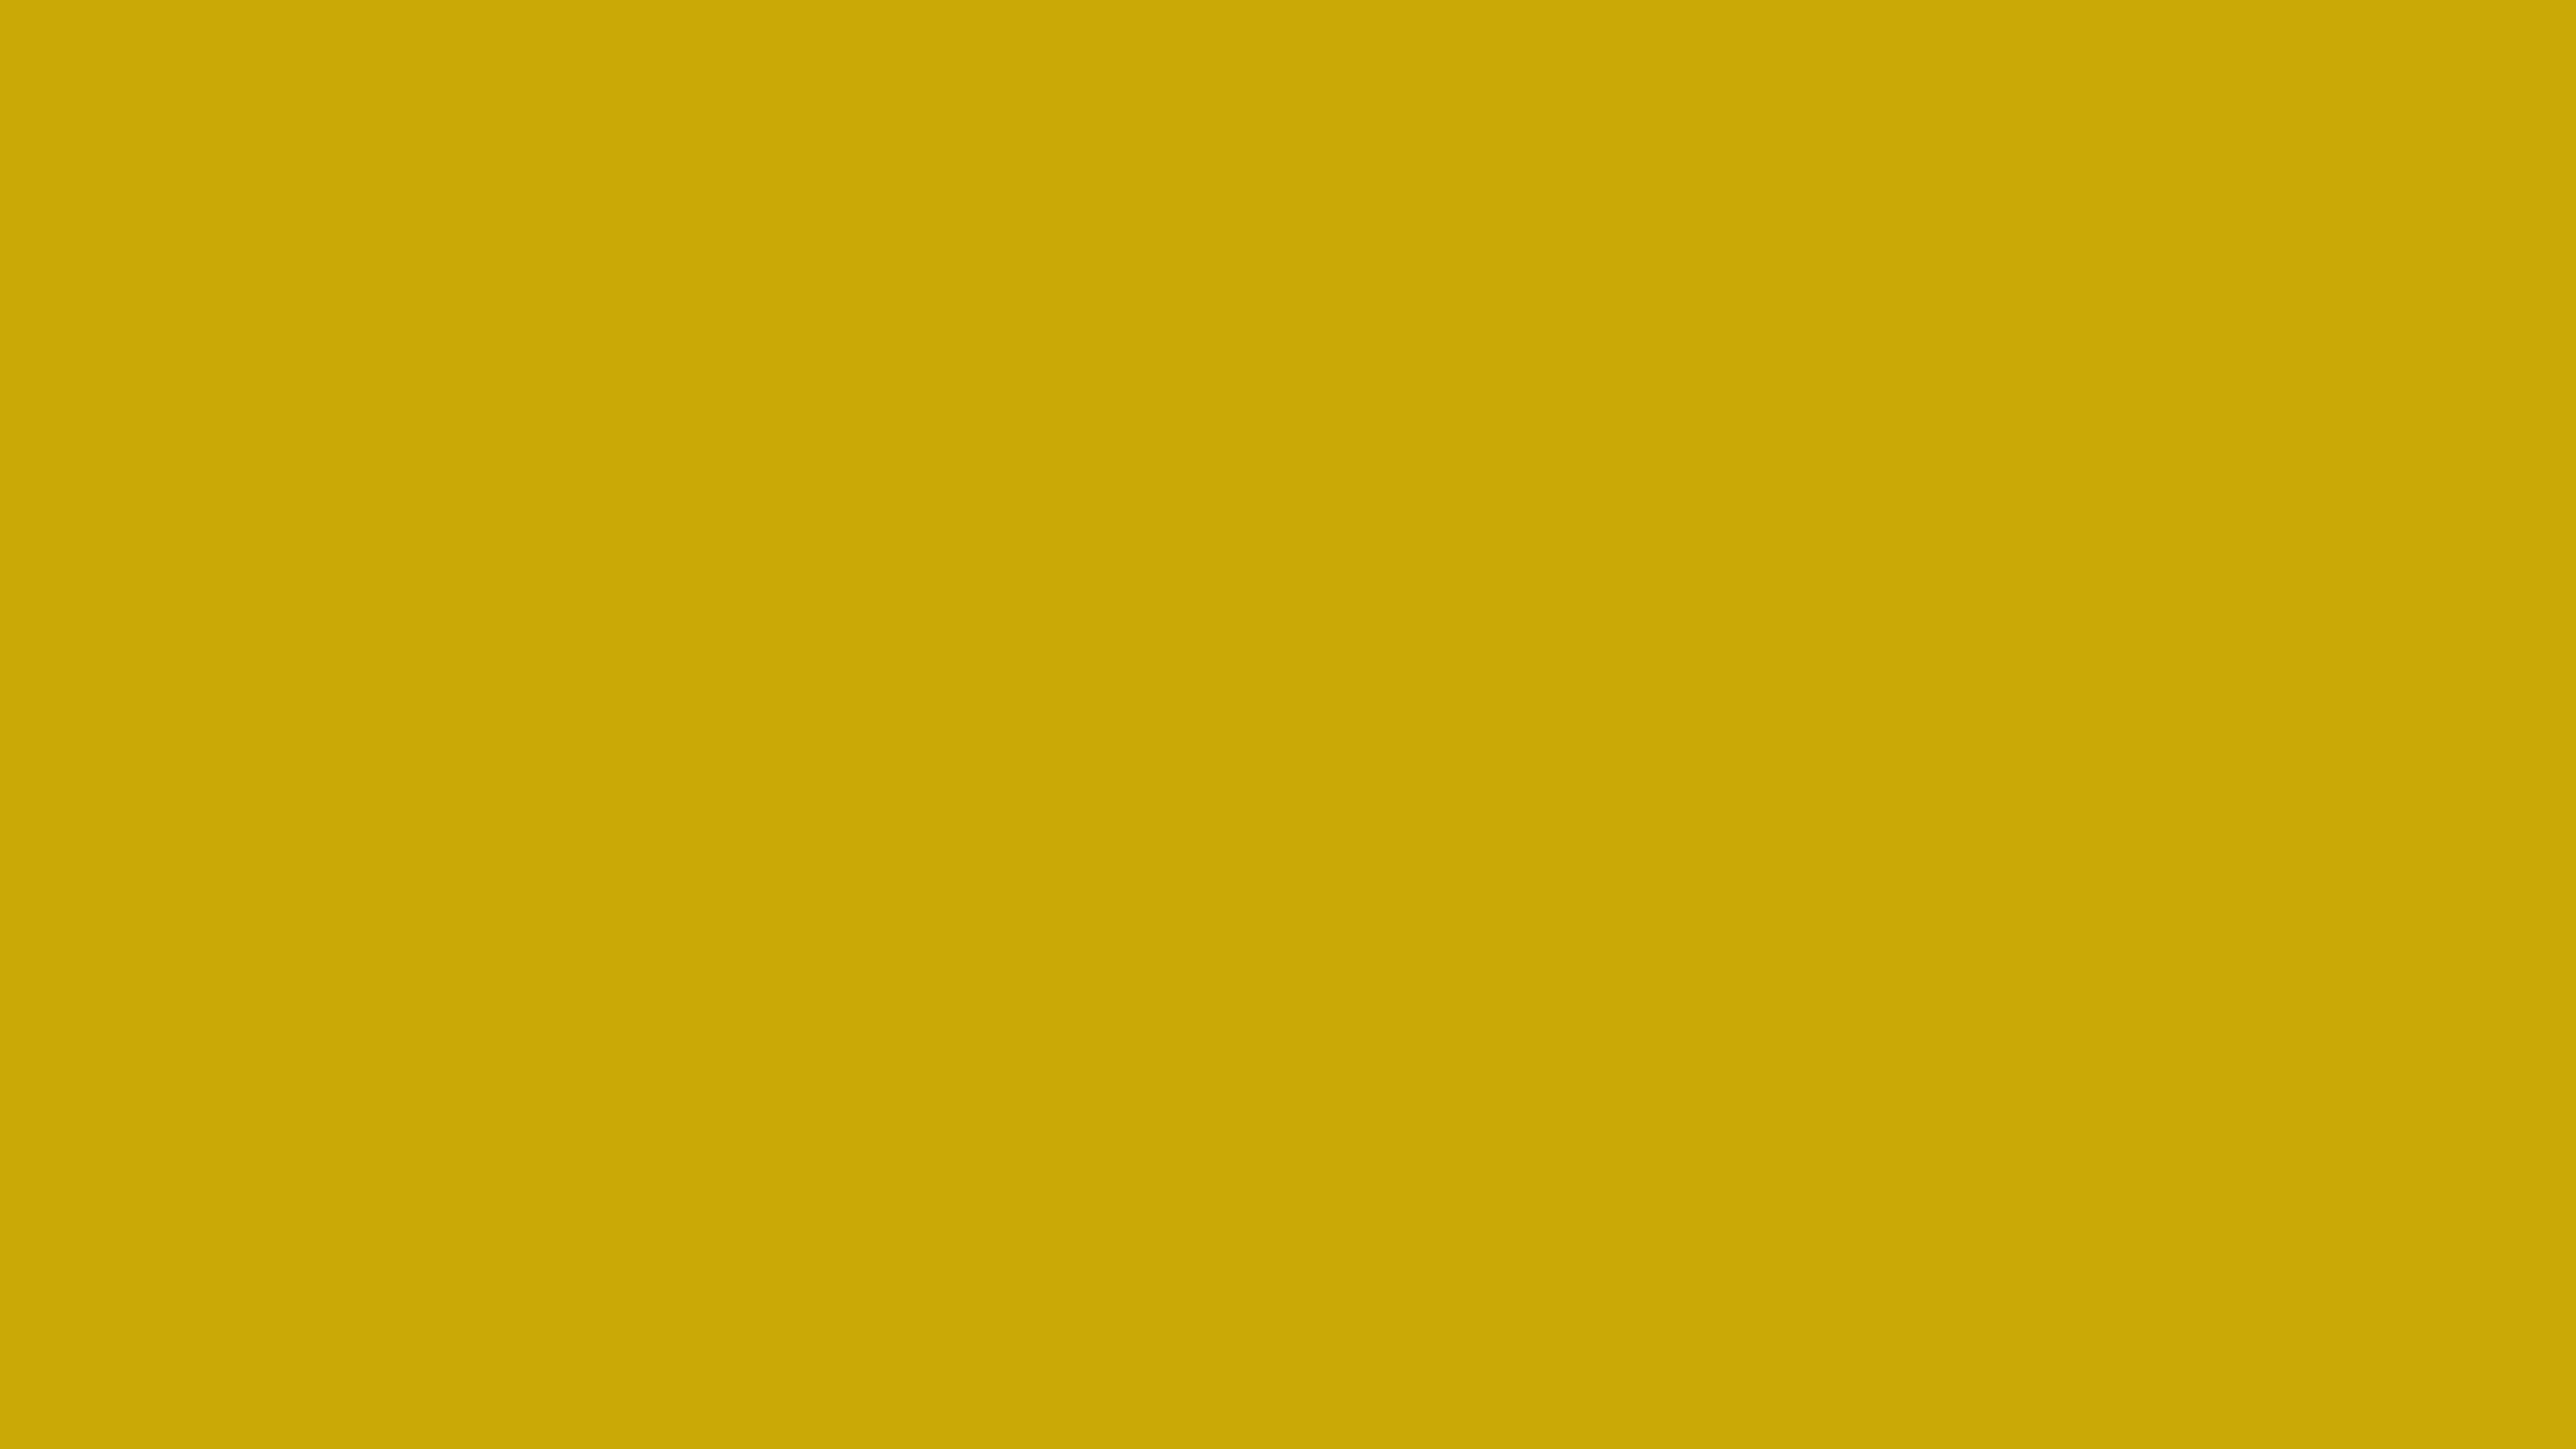 Christmas Gold Solid Color Background Image. Free Image Generator